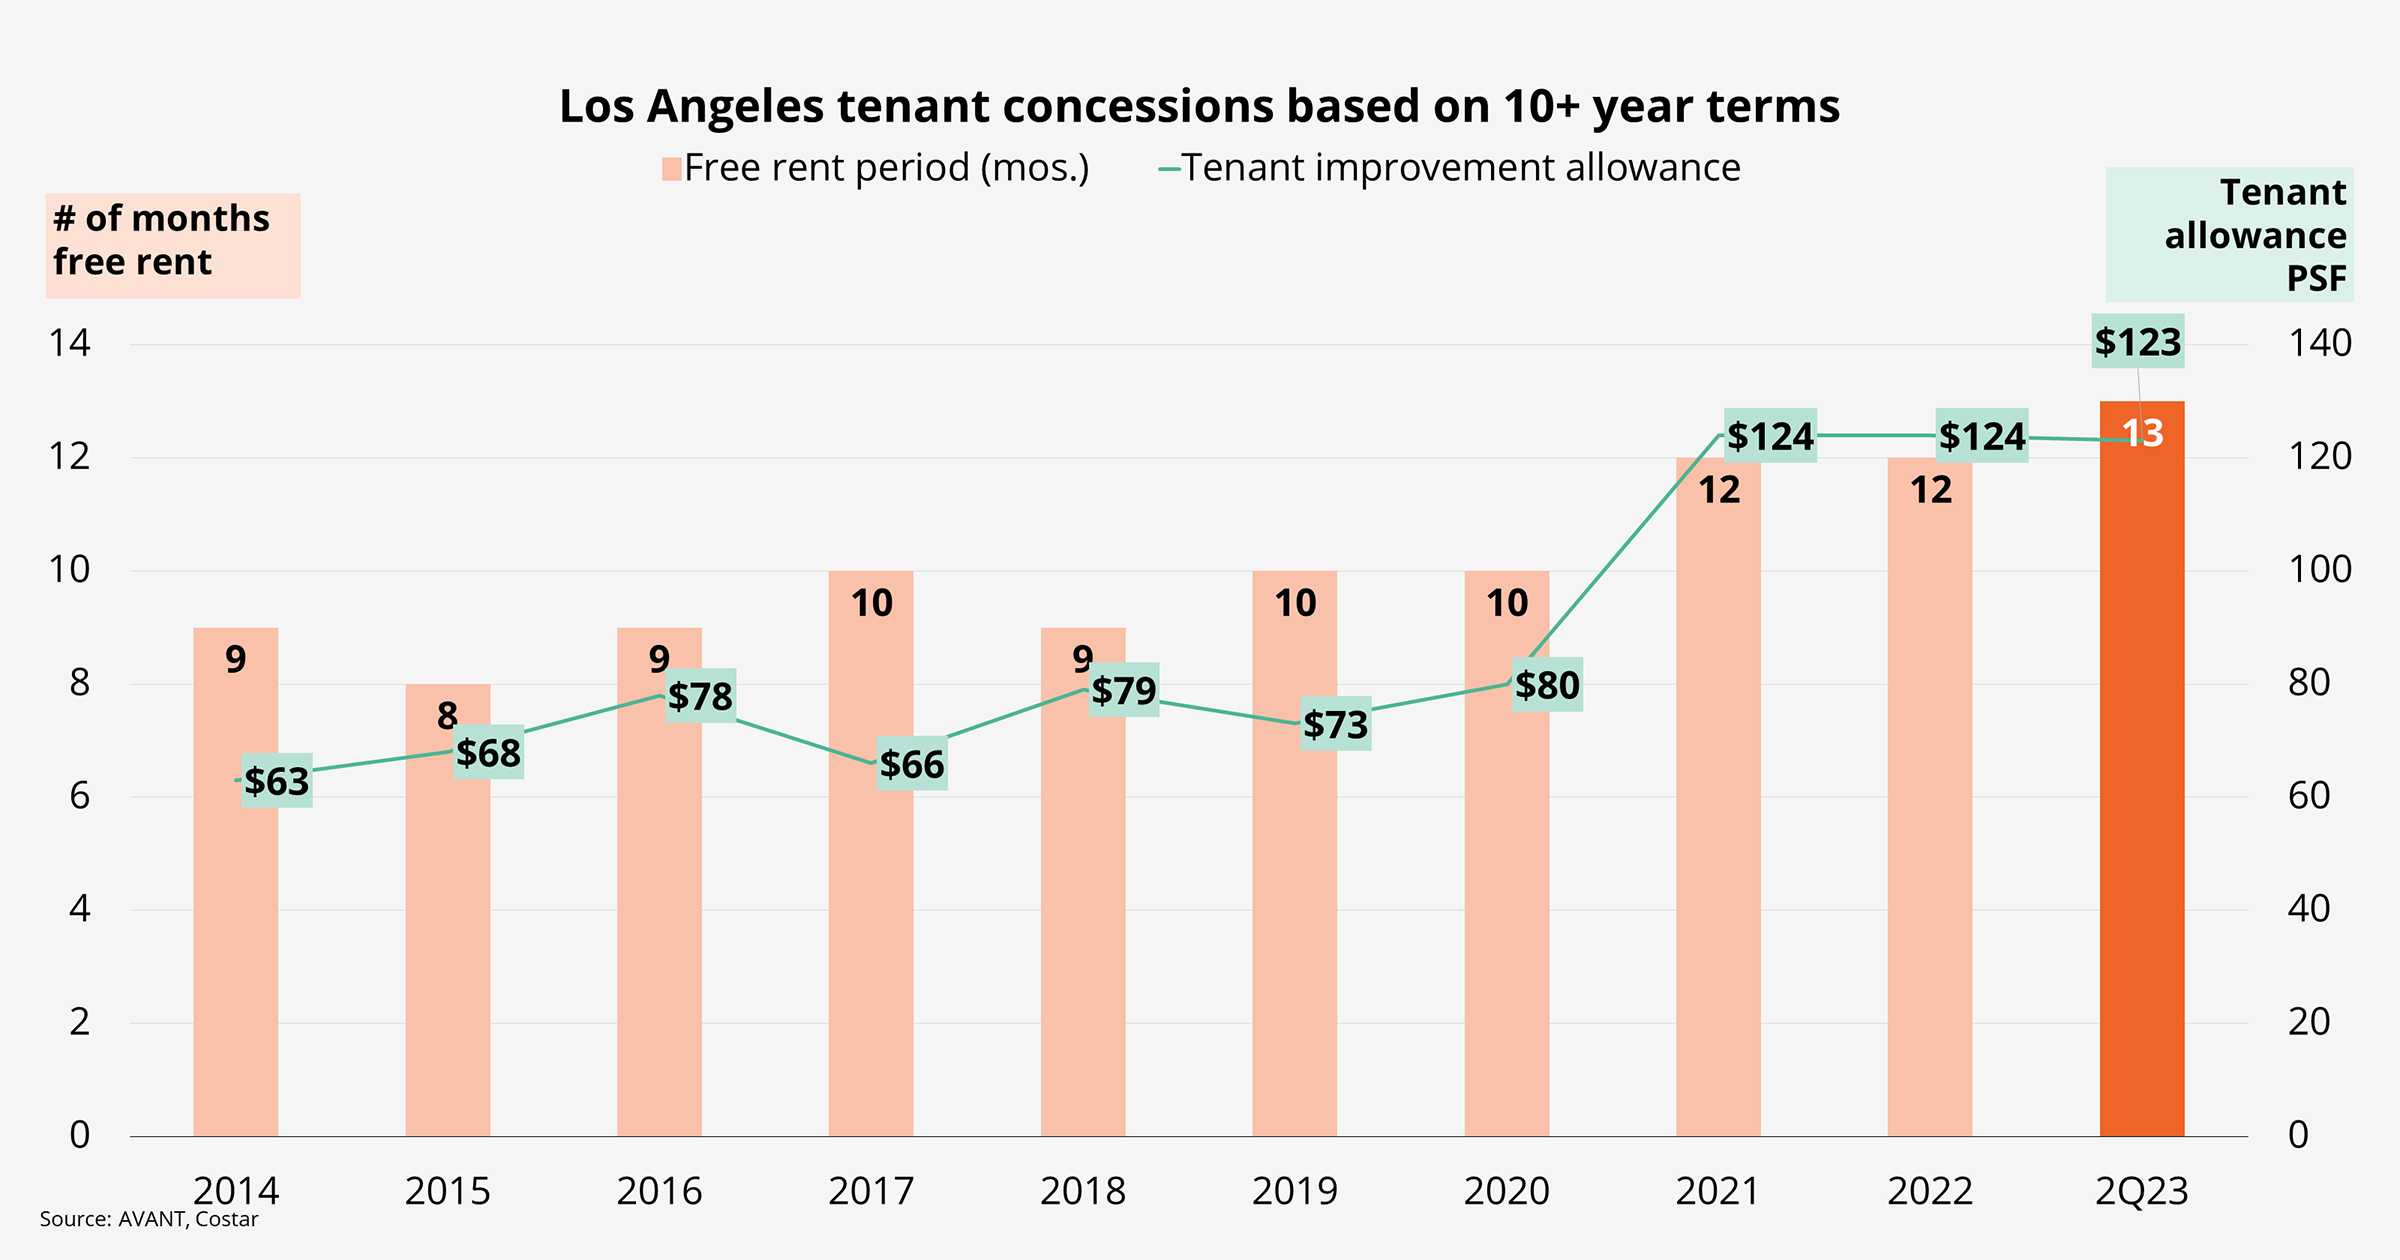 Downtown Los Angeles sees incentive in tenant concessions for longer term deals